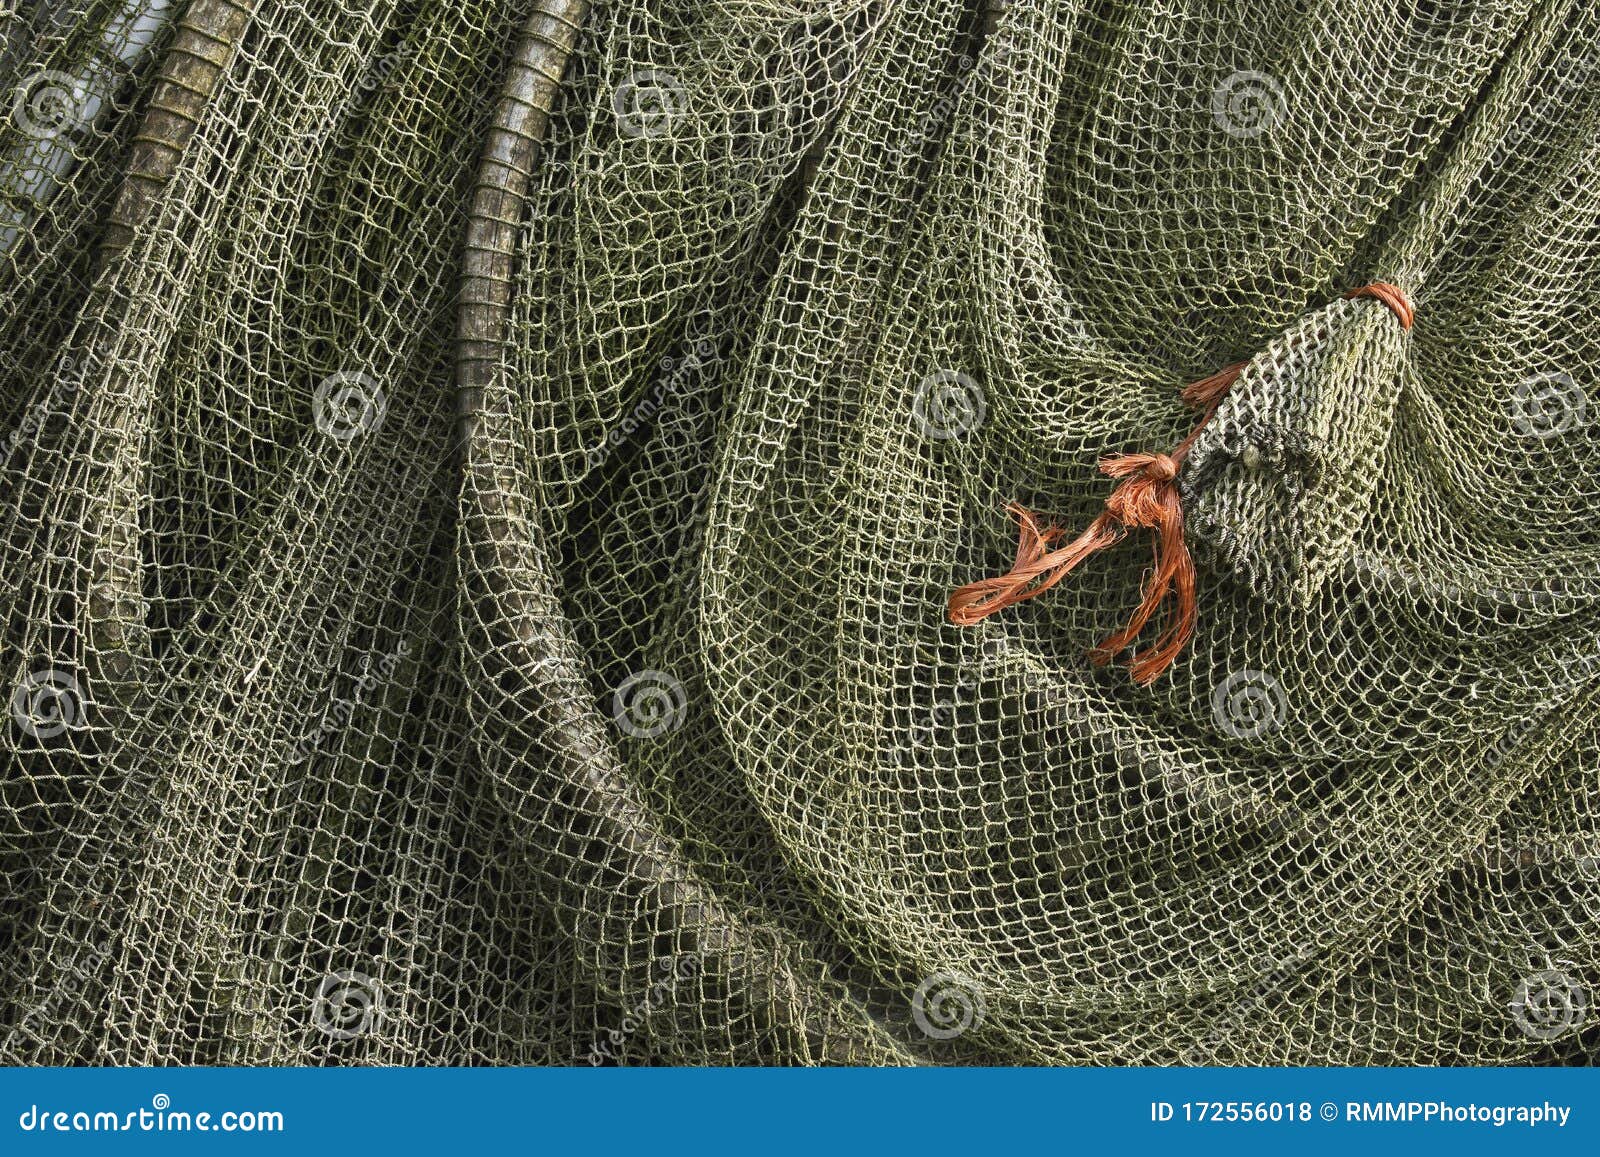 Close-up of an Old Fishing Net Stock Photo - Image of decoration